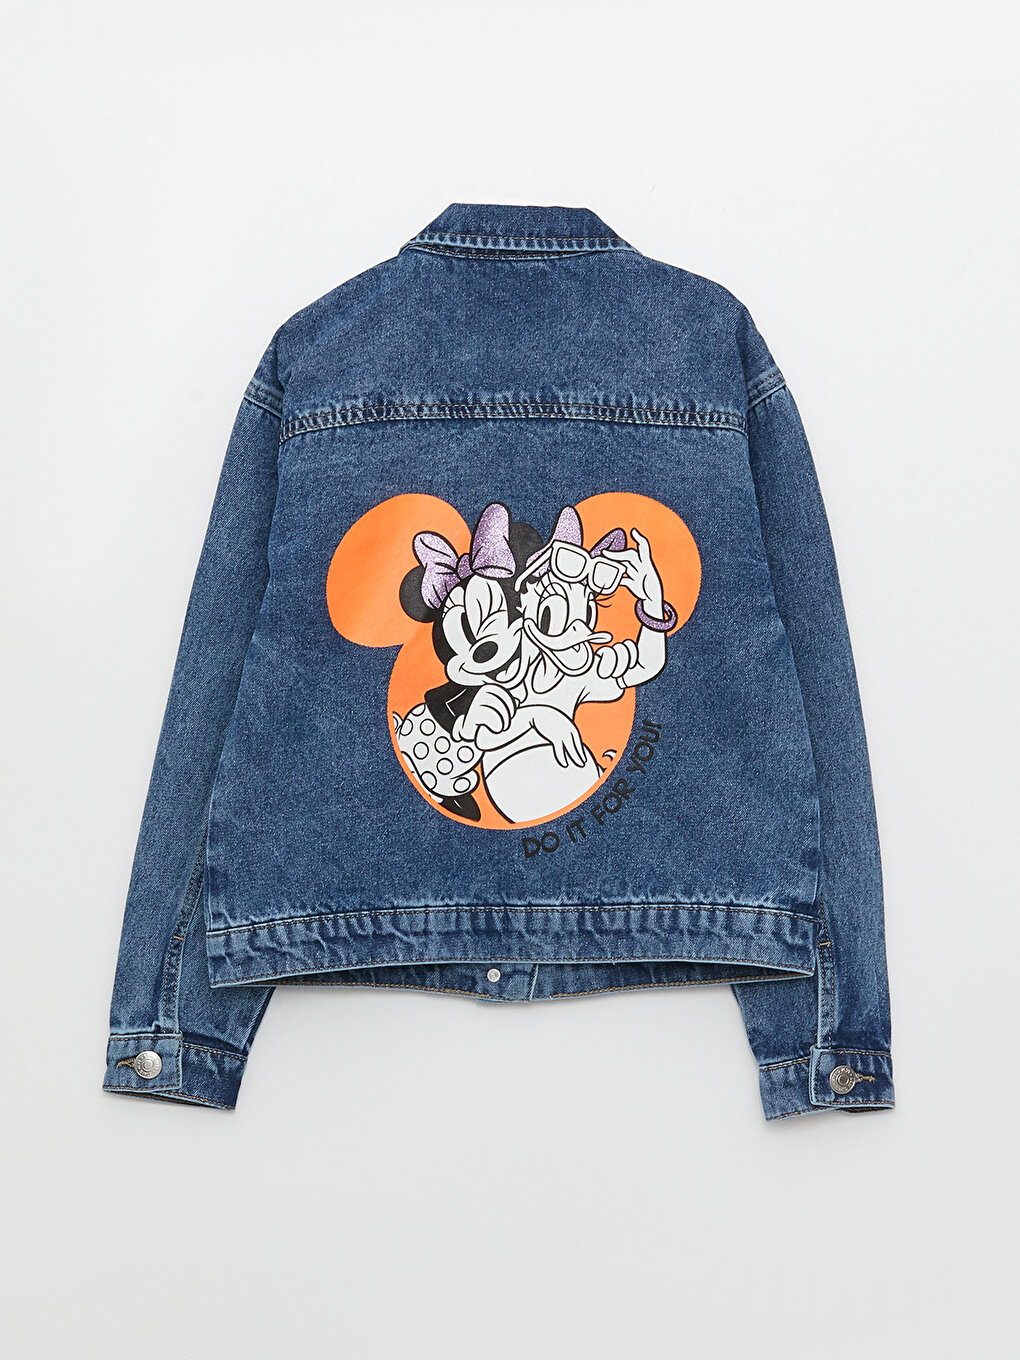 Shirt Neck Minnie Mouse Printed Girl Jean Jacket -S30277Z4-502 